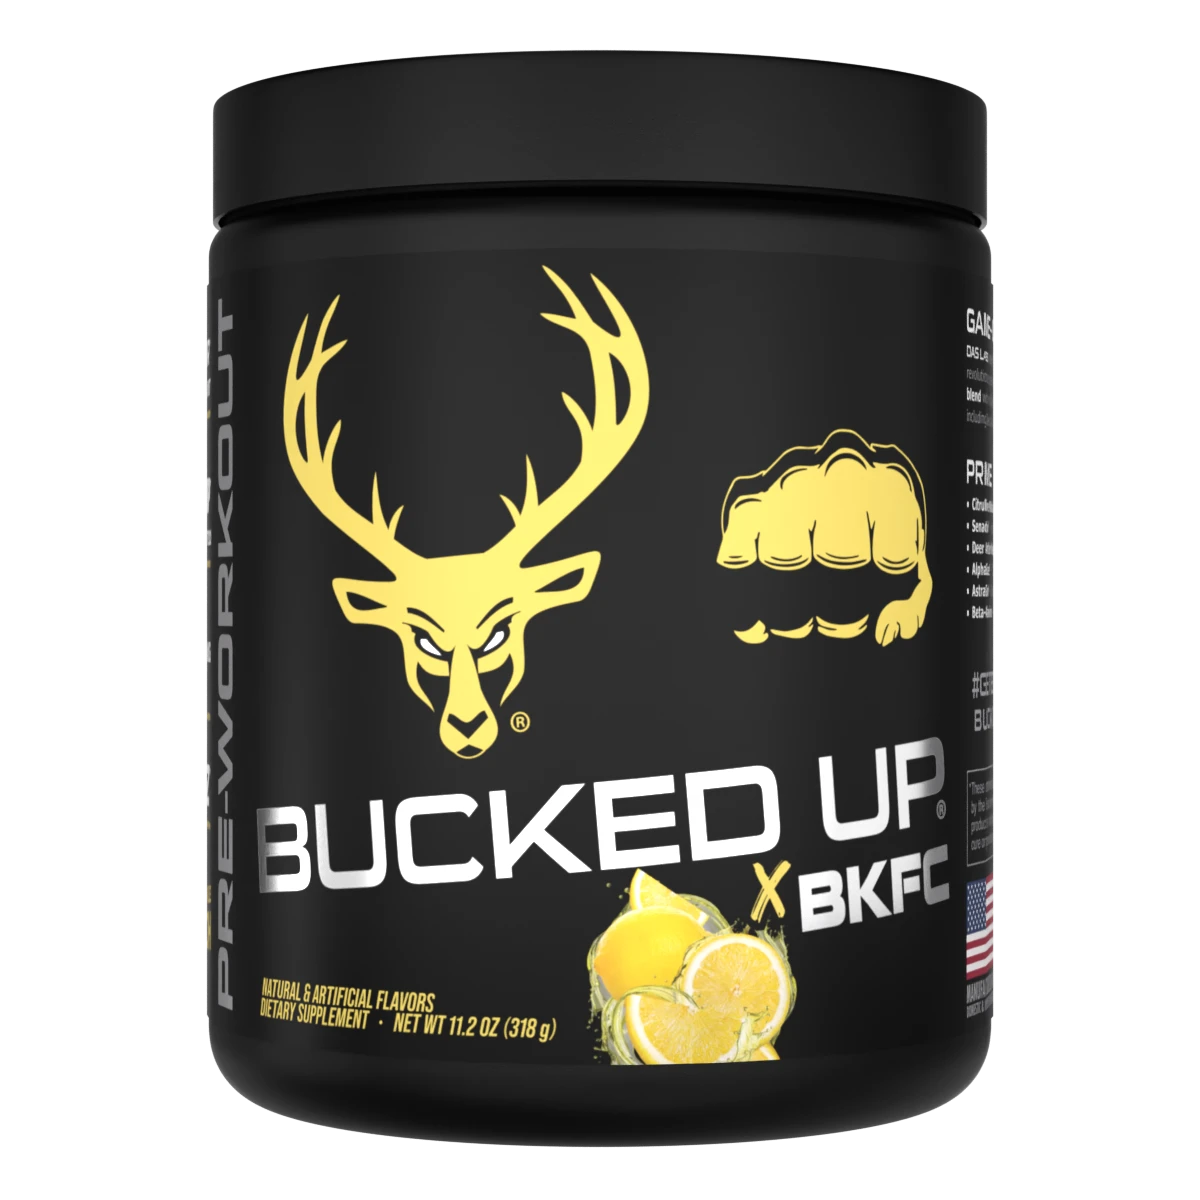 Bucked up - Das Labs